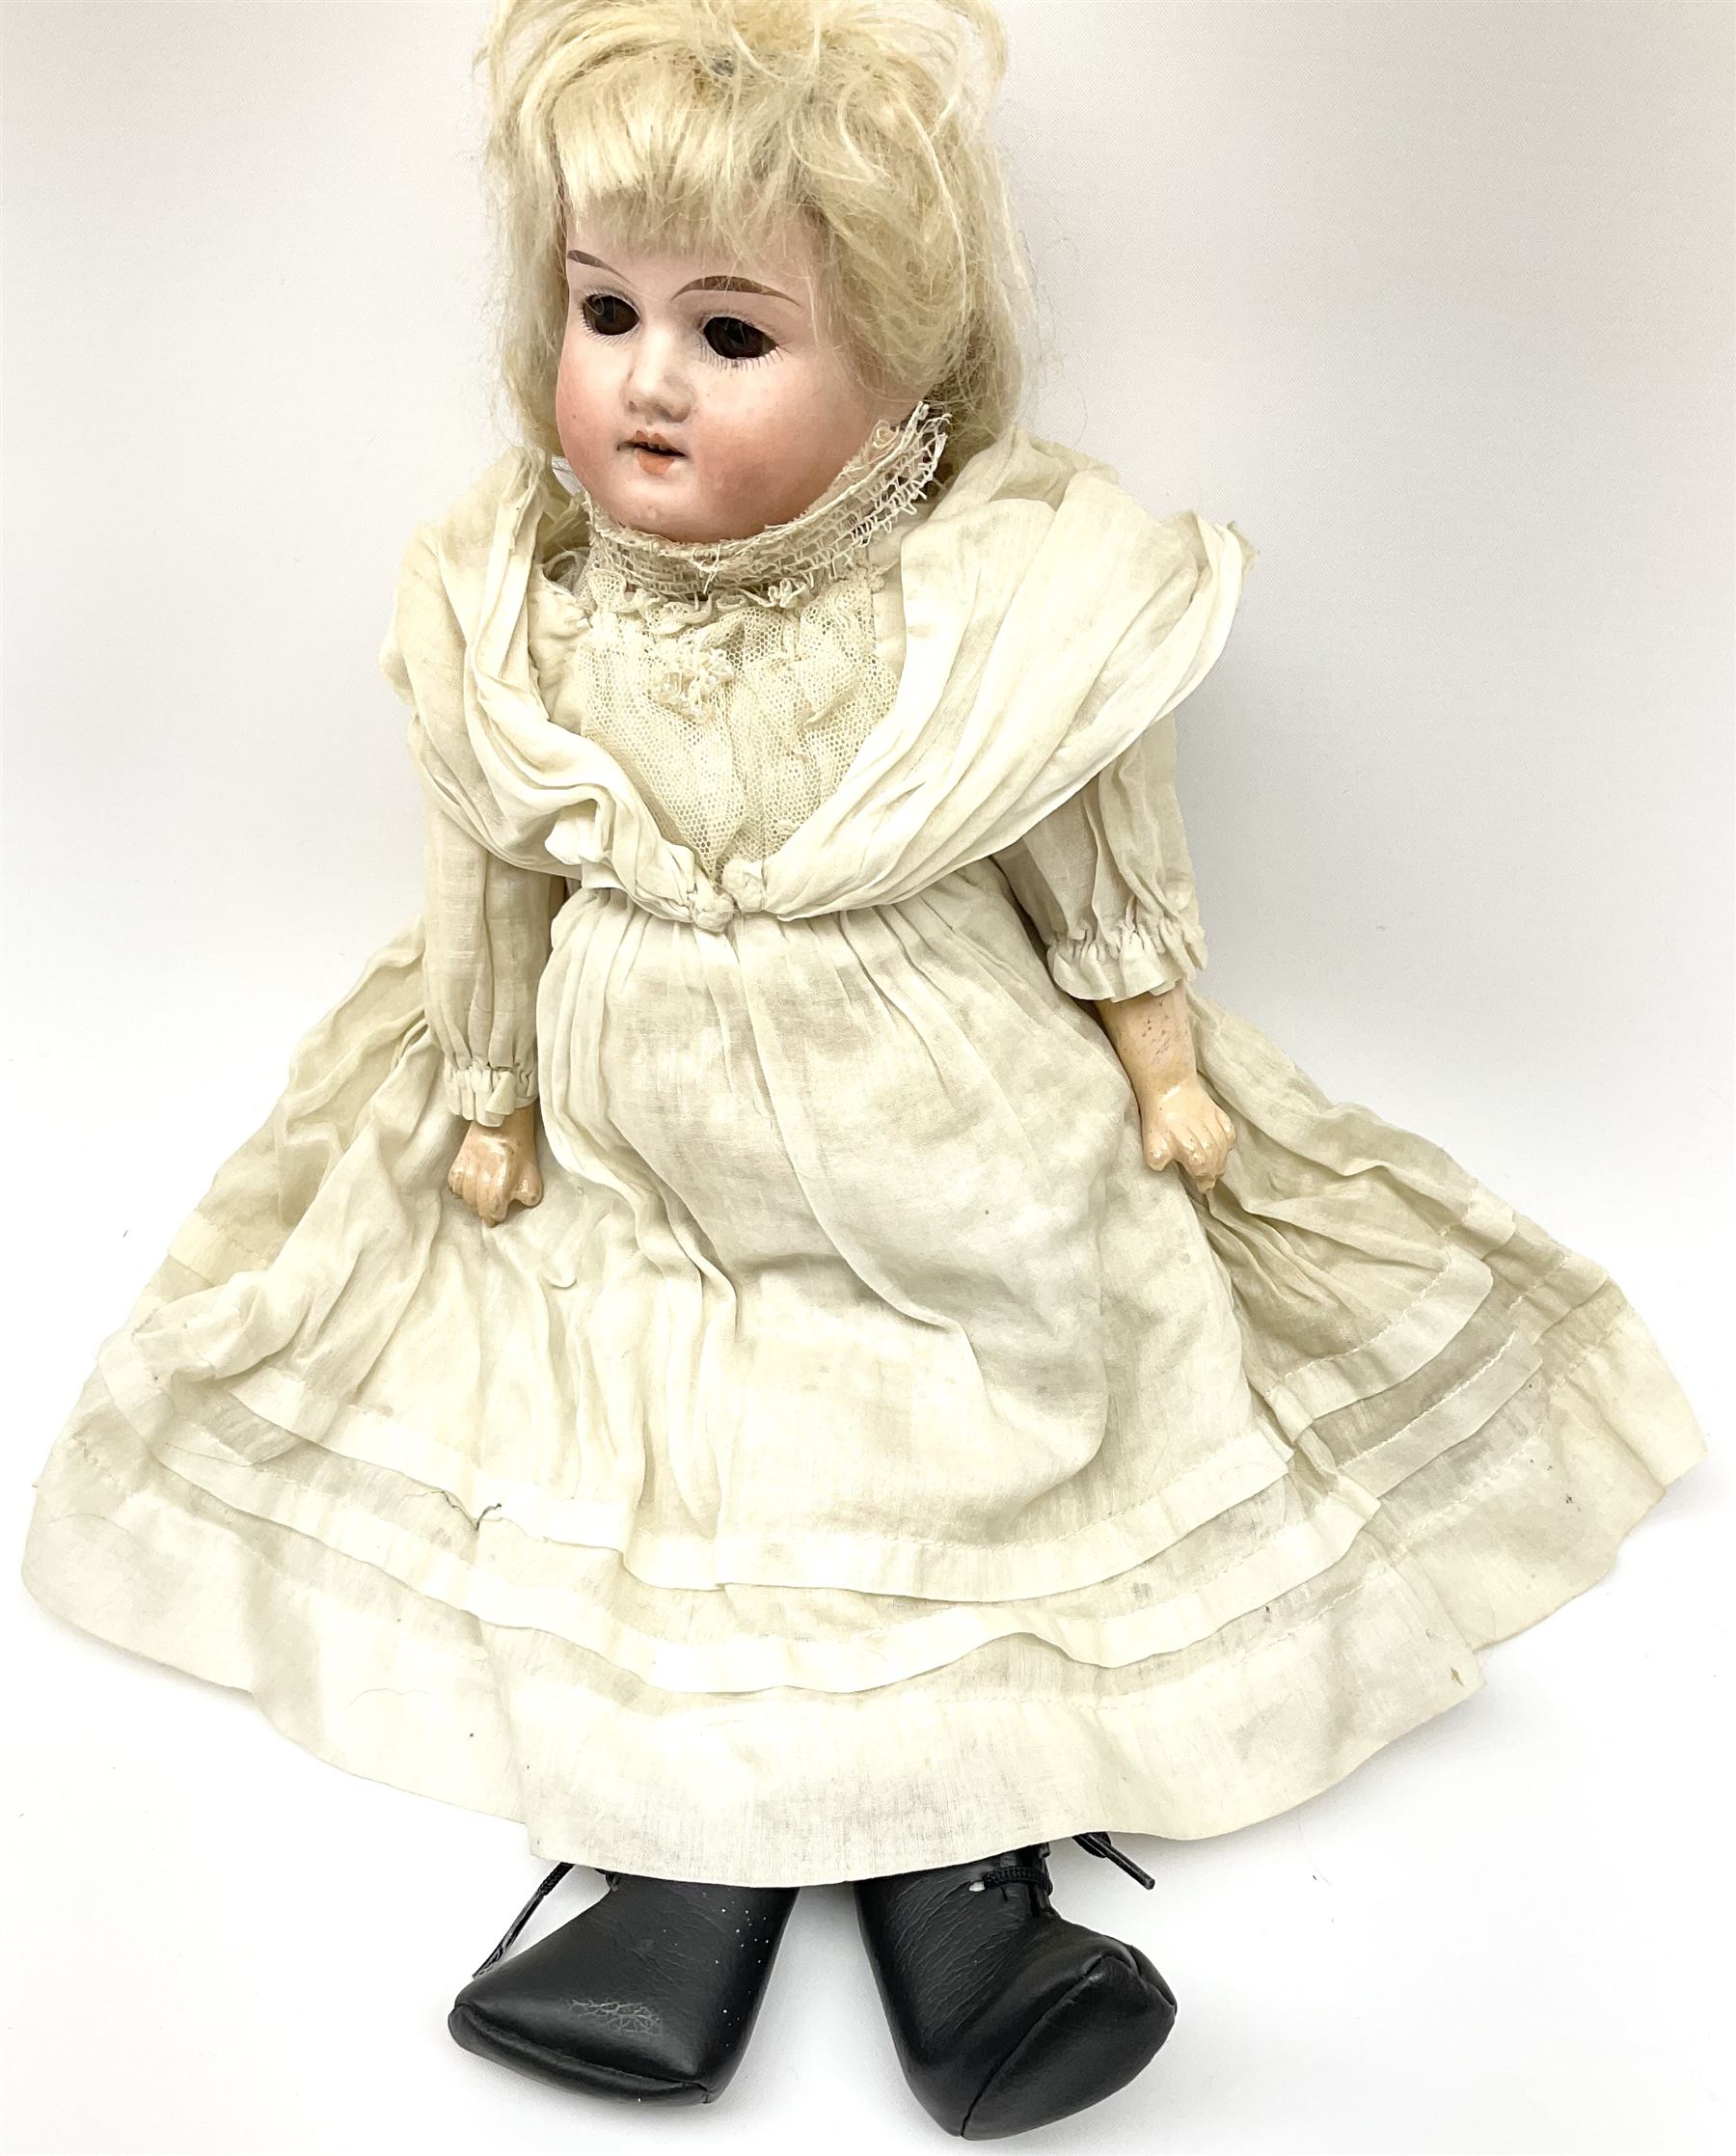 Armand Marseille Koppelsdorf bisque head doll with applied hair - Image 16 of 17